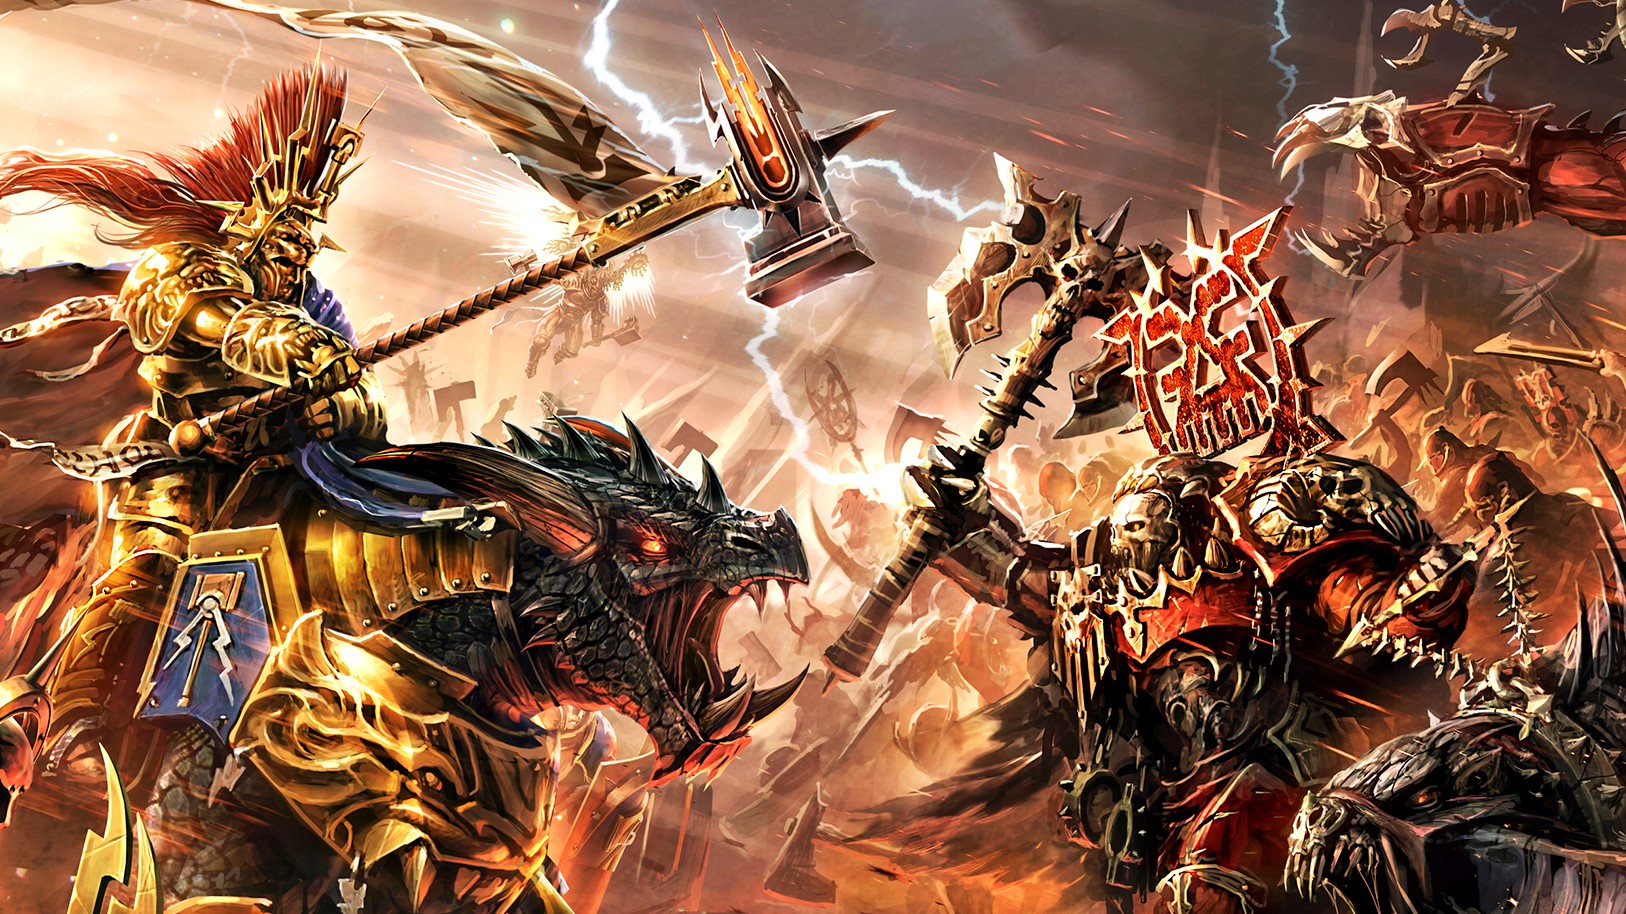 Nexon is Working On A Warhammer MMO(We Think) Titled Warhammer Age of Sigmar